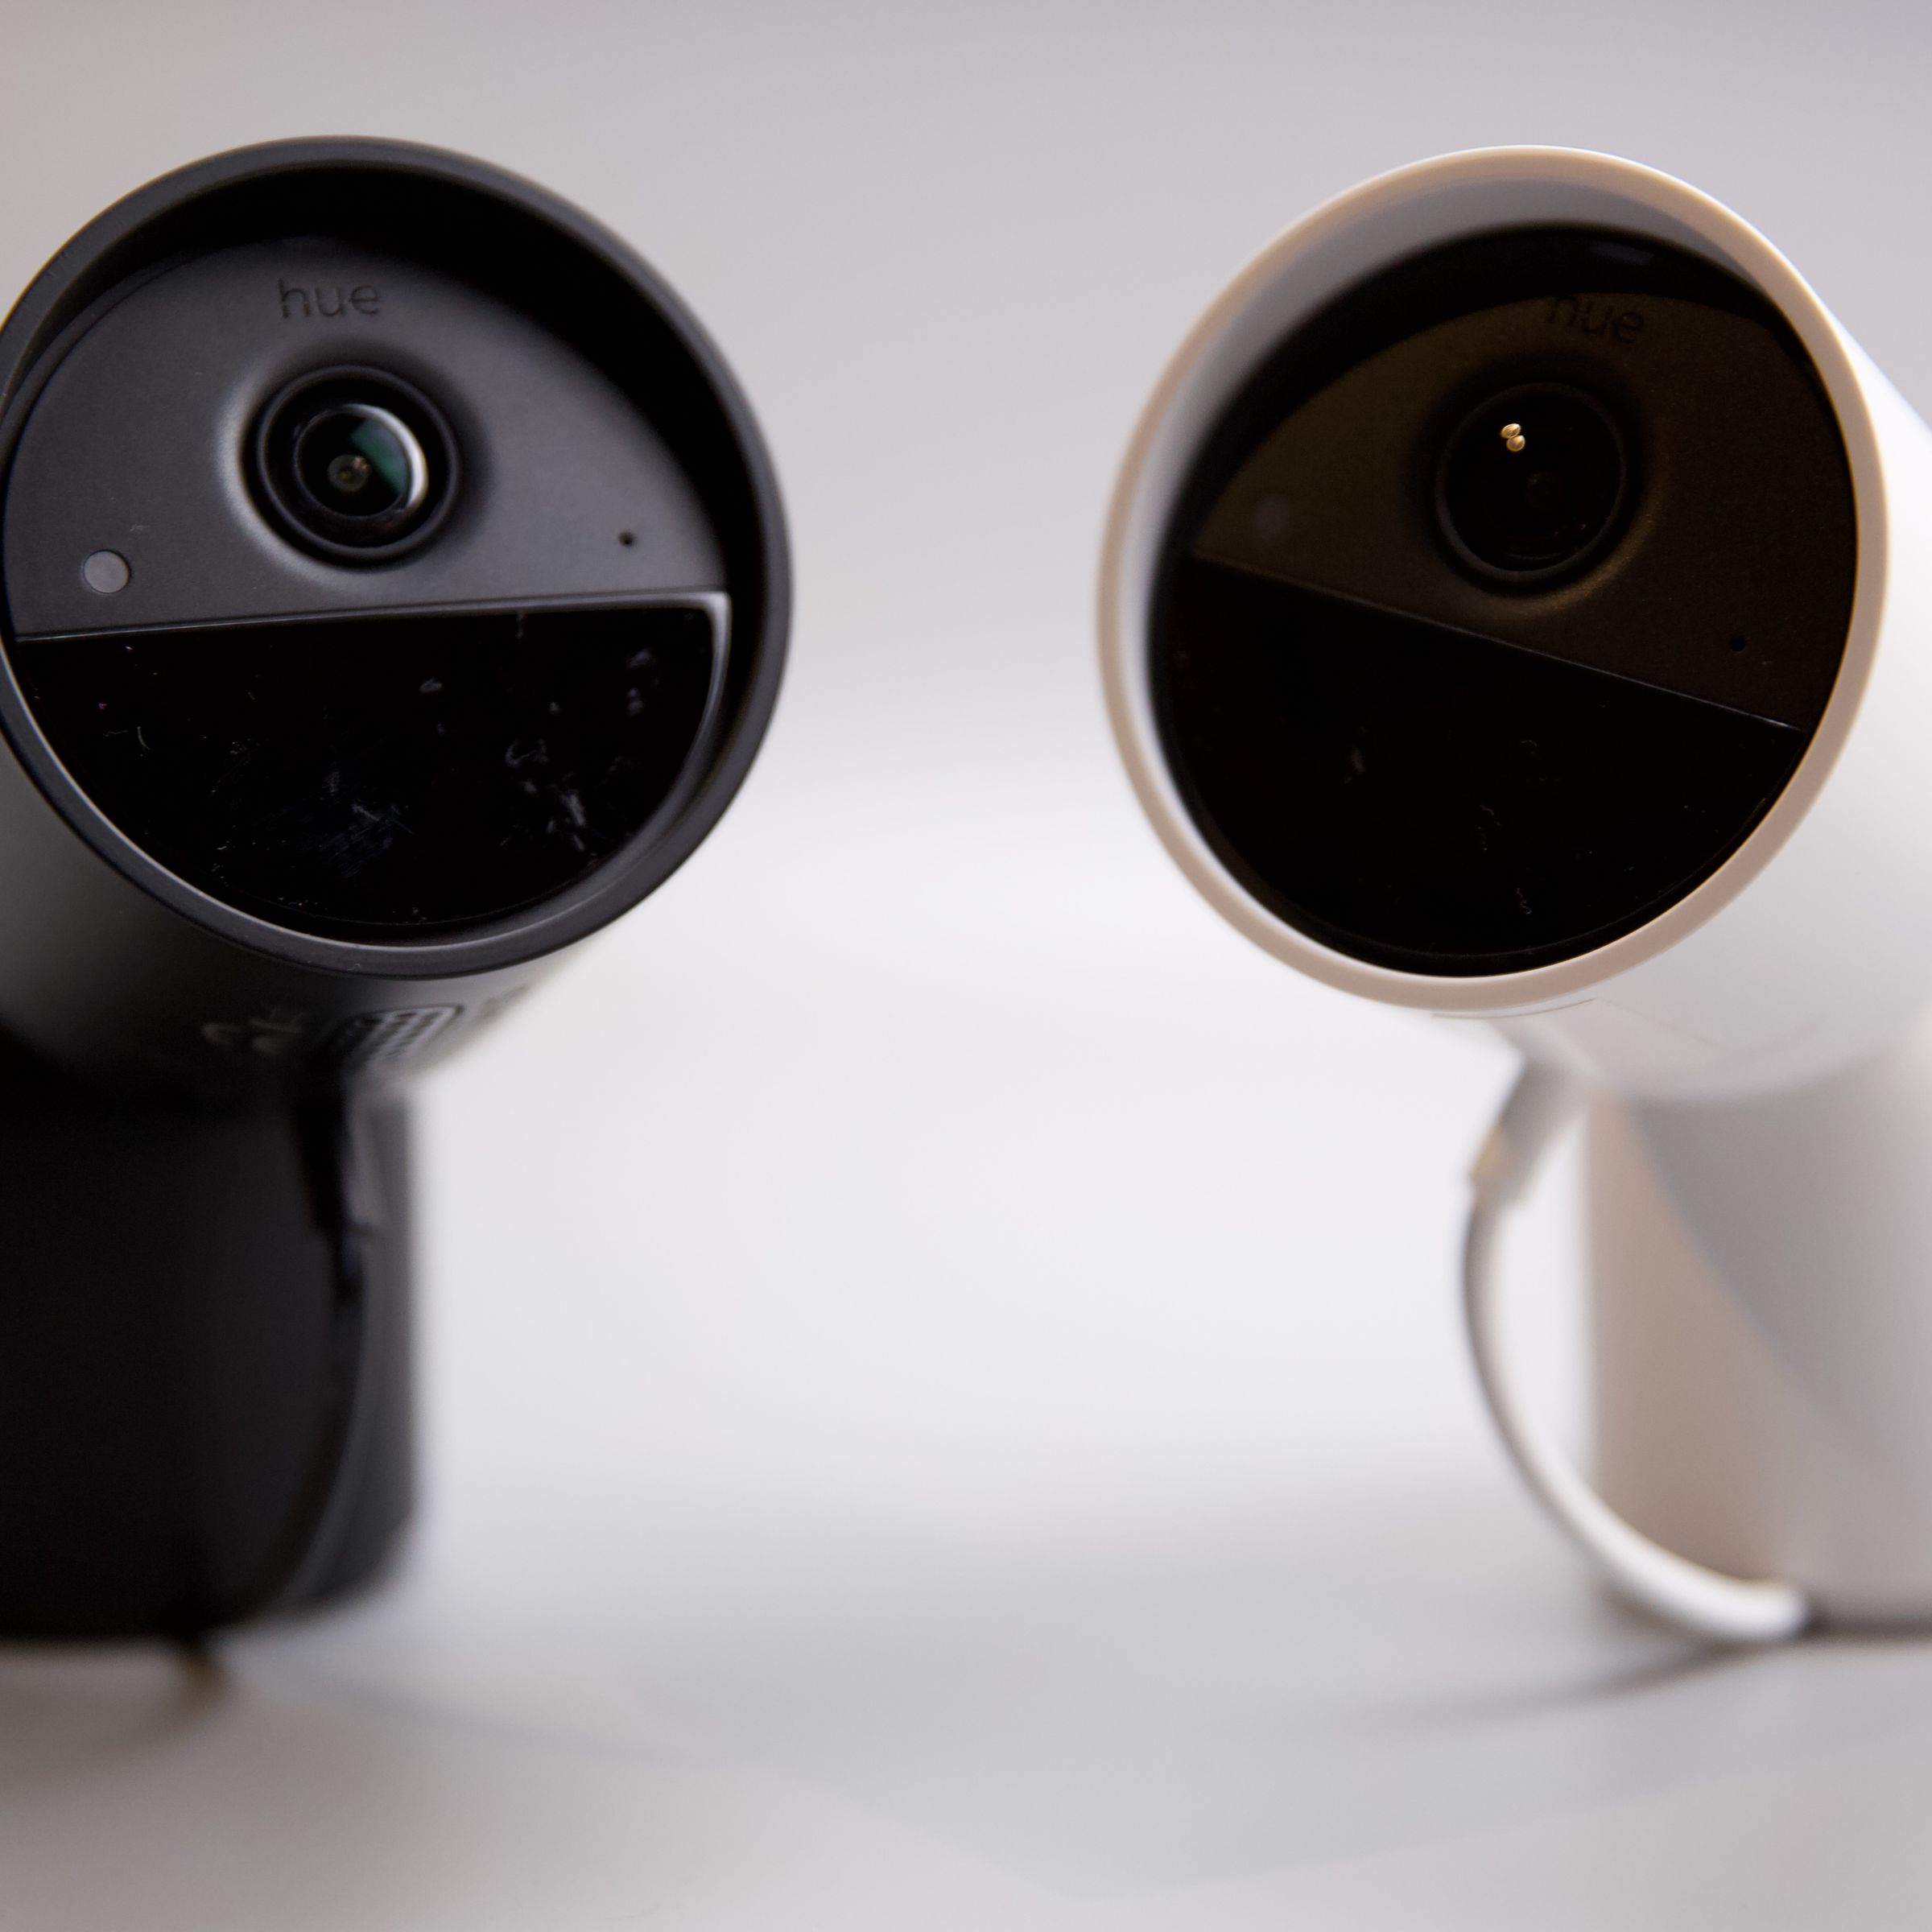 Philips Hue’s new wired indoor/outdoor security camera comes in black or white and can work as a motion sensor for Hue’s smart lighting and its new Hue Secure security system.